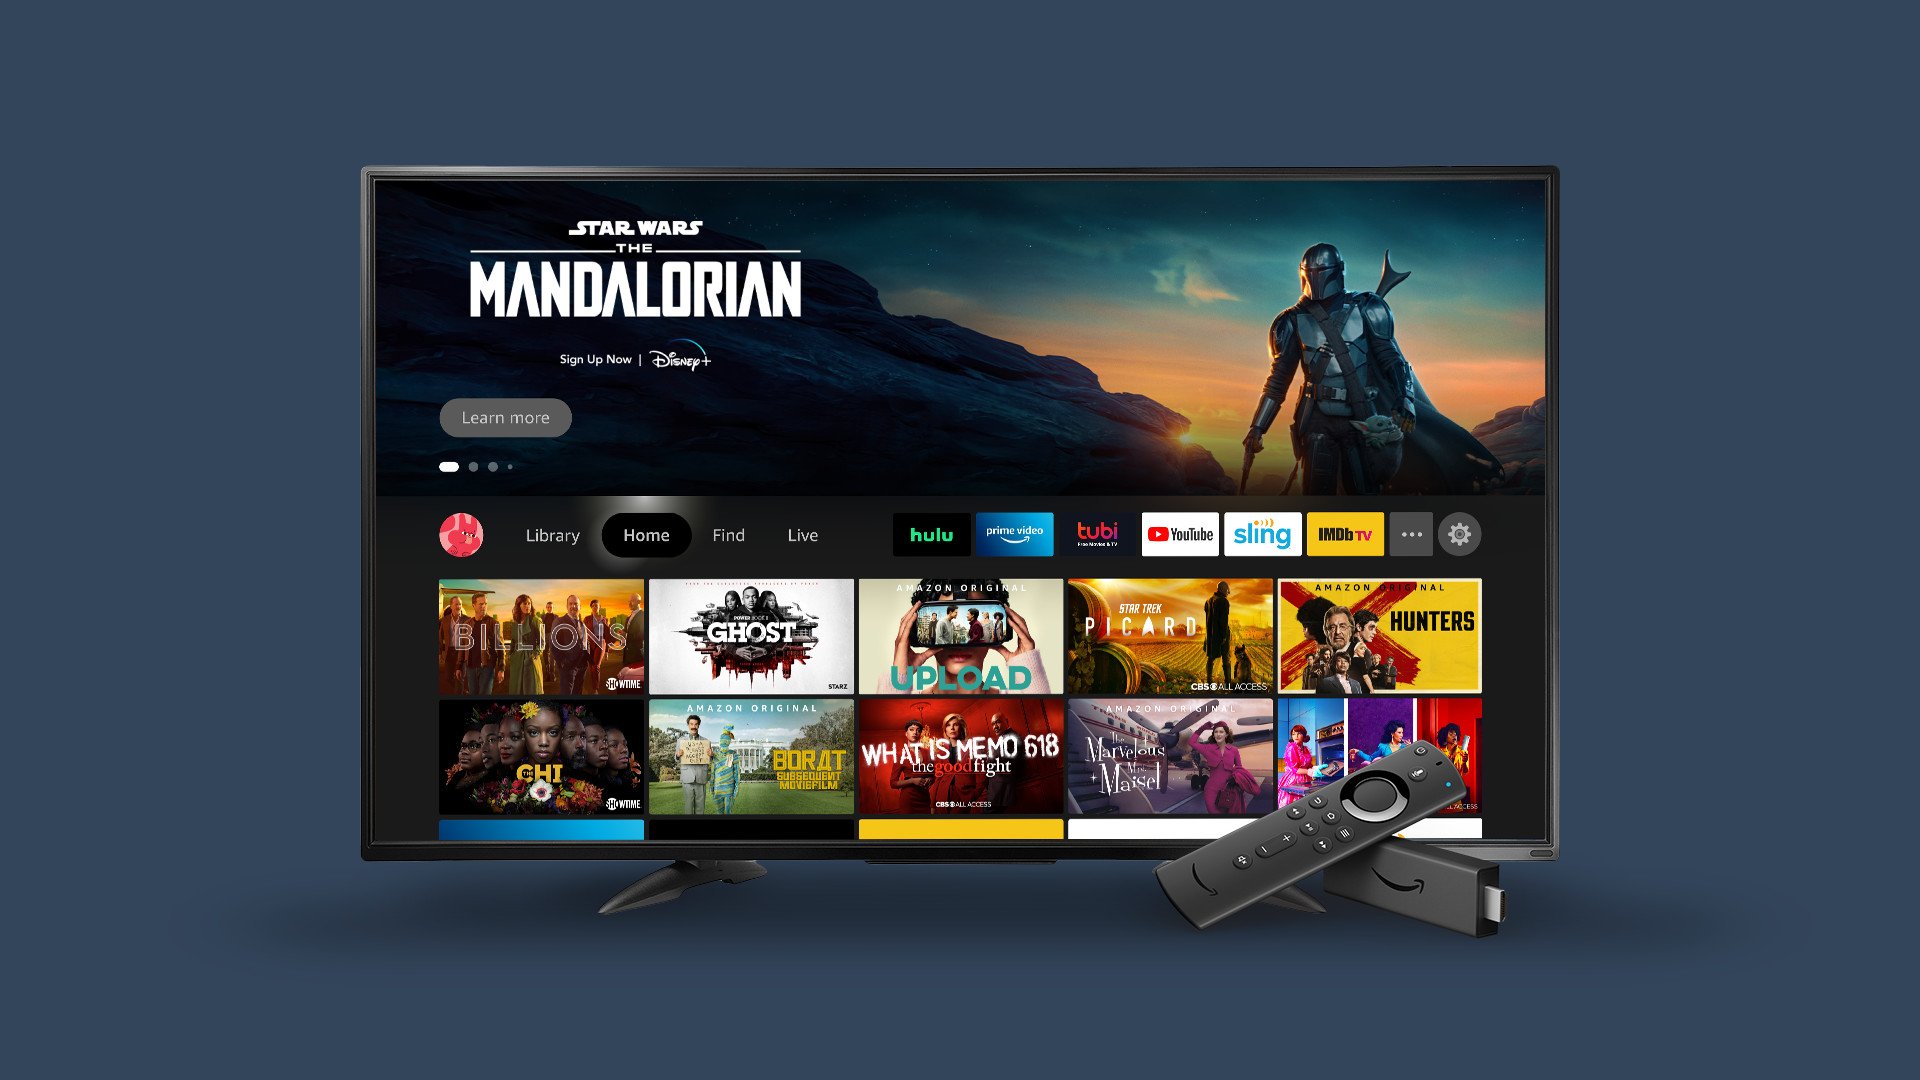 announces next-gen Fire TV Stick, Fire TV Stick Lite, and user  experience - About  India